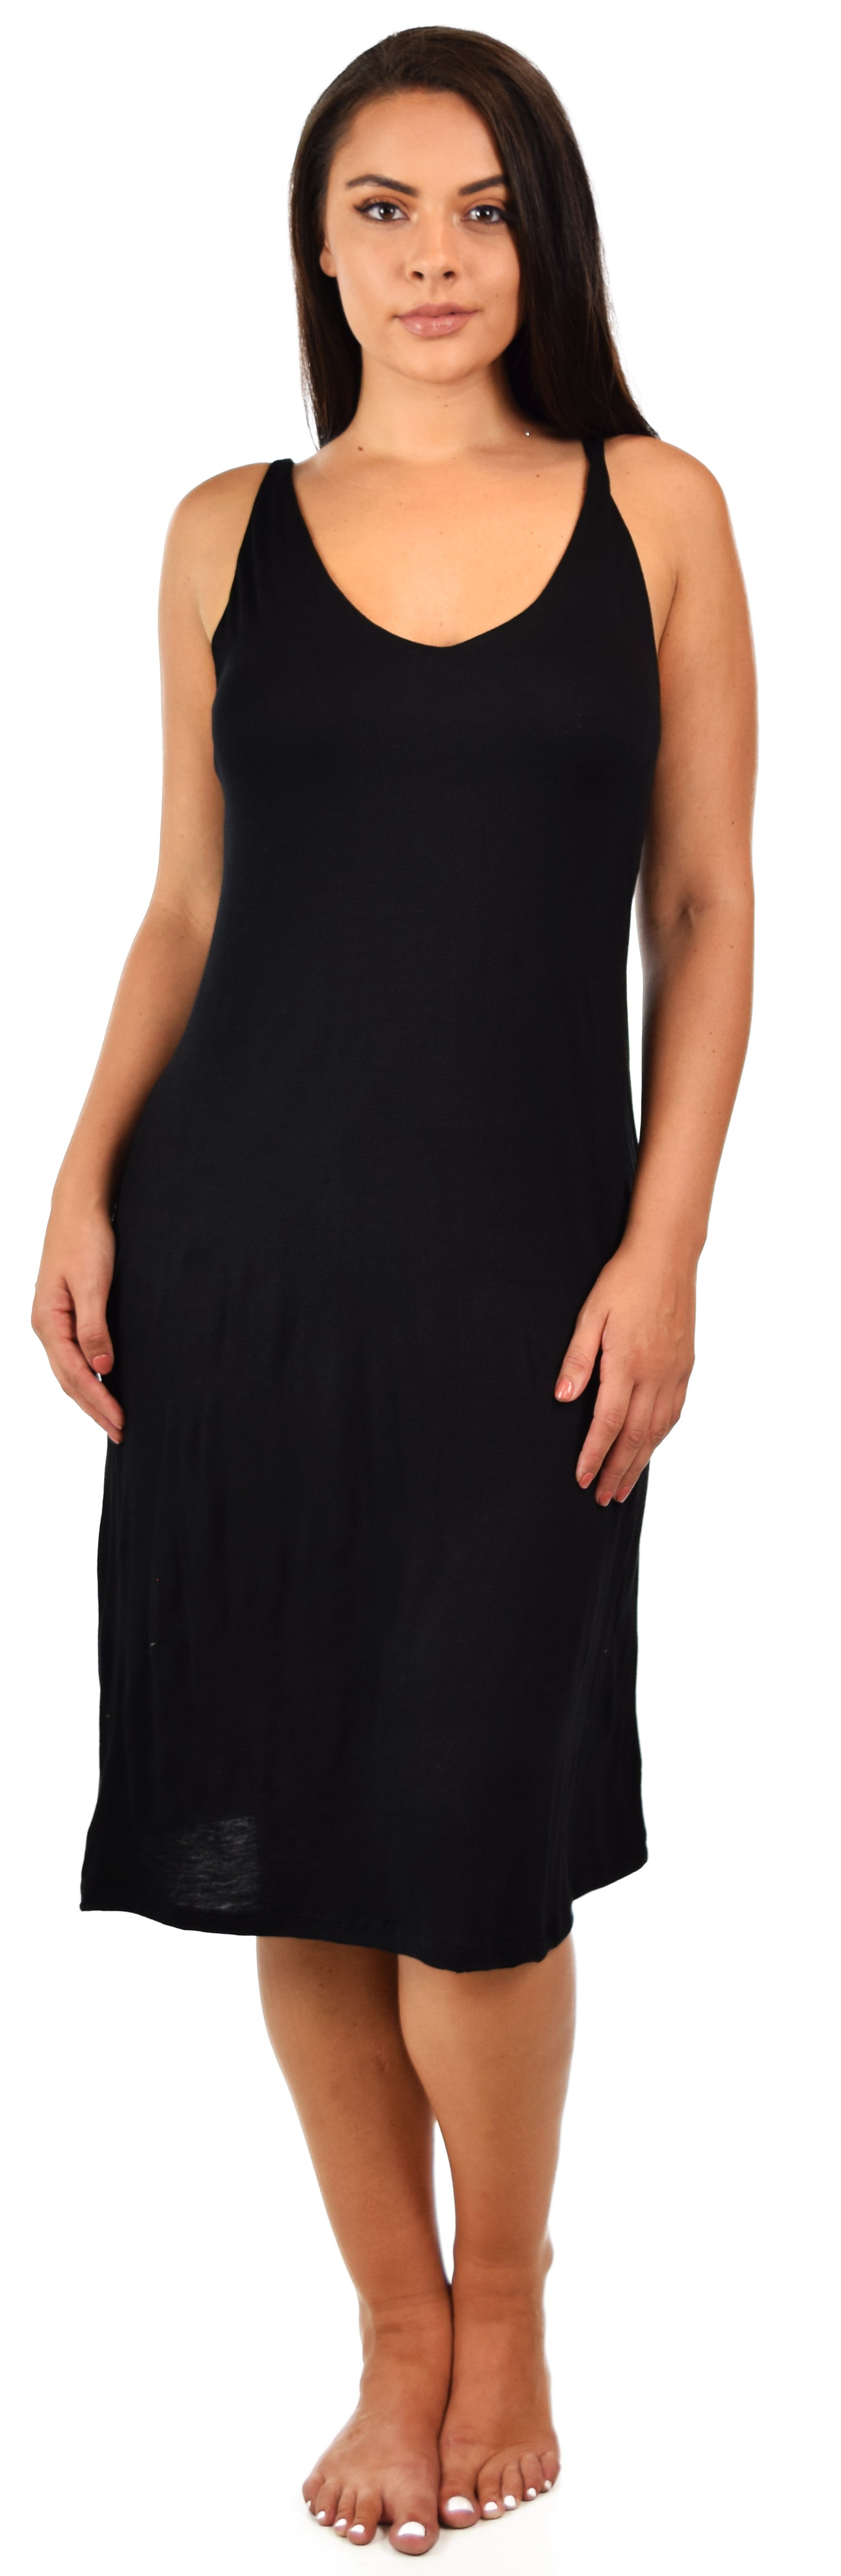 The Ulimate Full Slip, Slip Dress, Travelers Underwear In Plus and